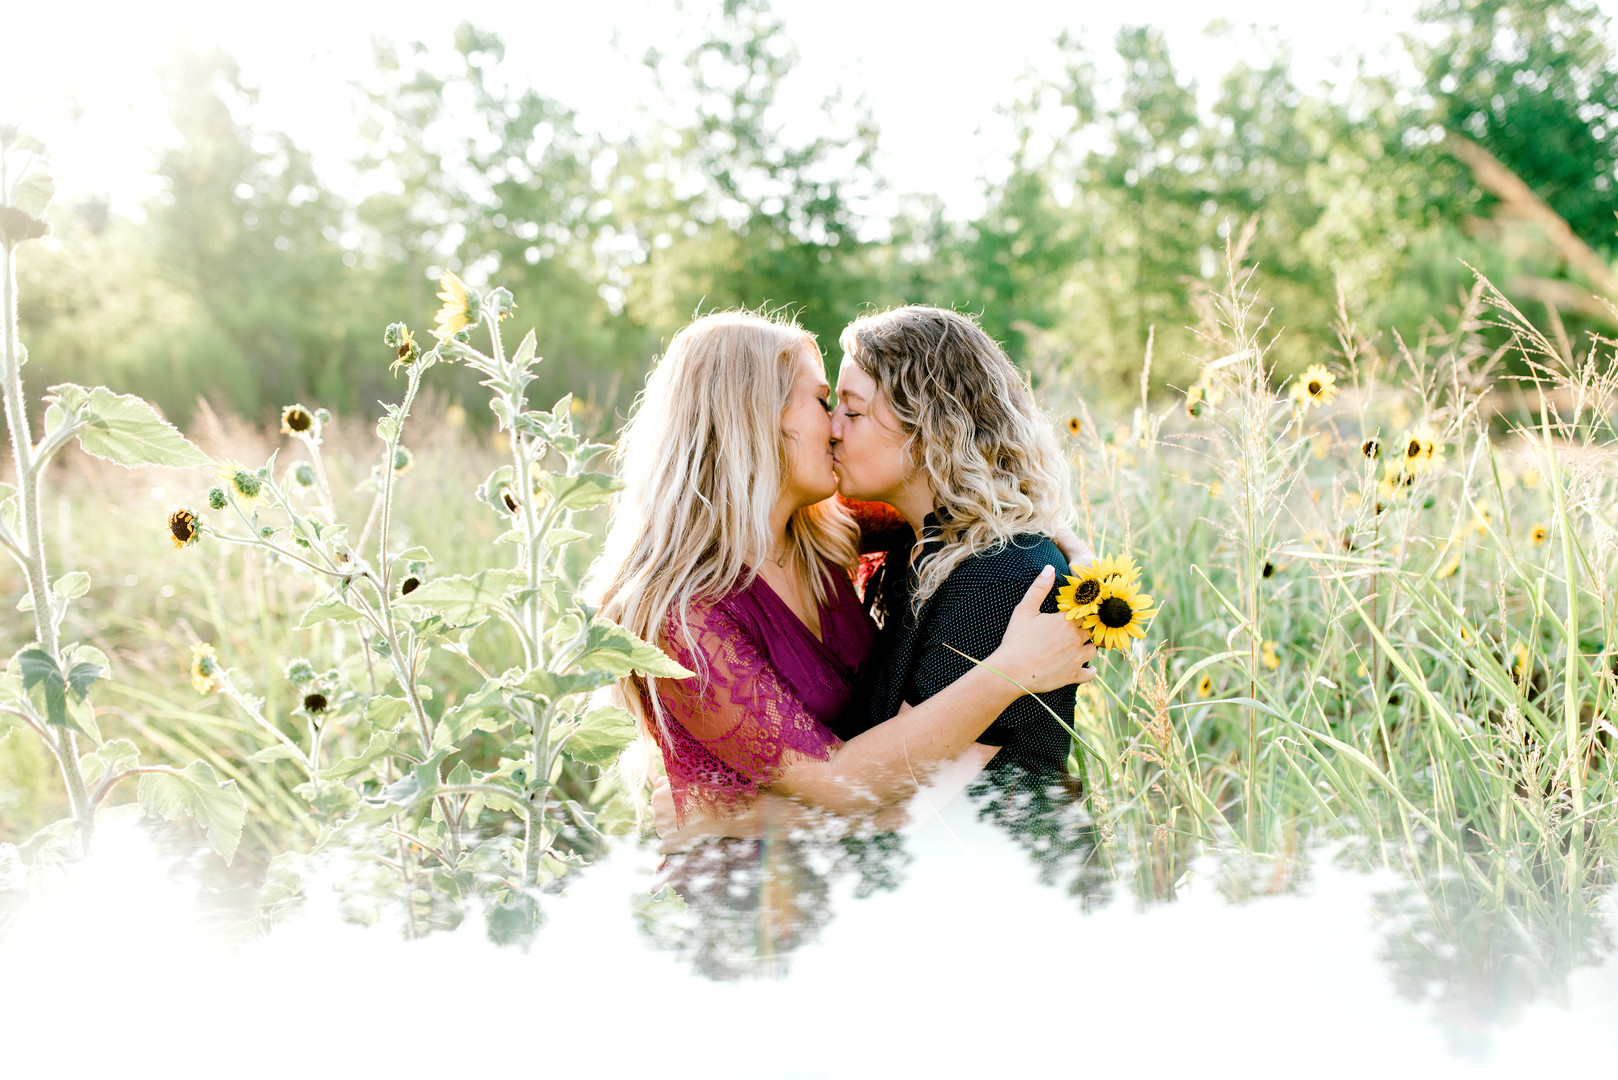 Bright, floral engagement session in downtown Dallas, Texas two blonde brides ring casual sunrise jeans red lace dress heels boots flowers garden